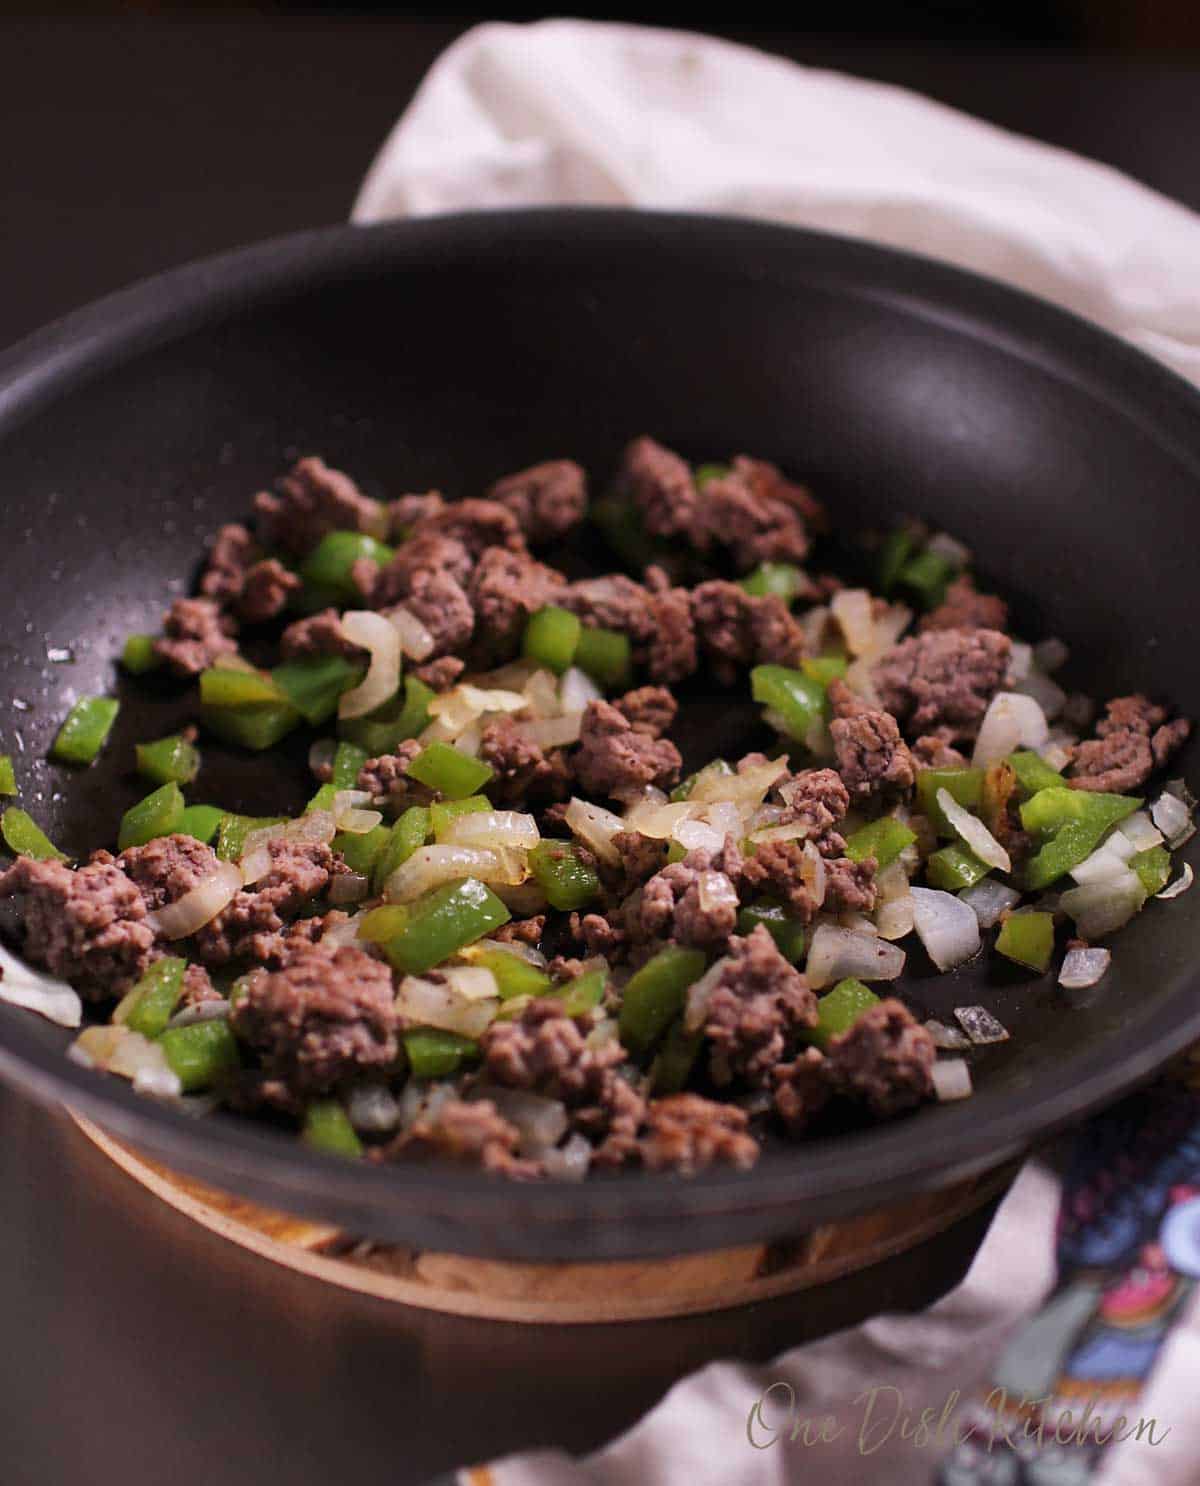 Ground beef, onions, green bell peppers, and garlic cooking in a frying pan.